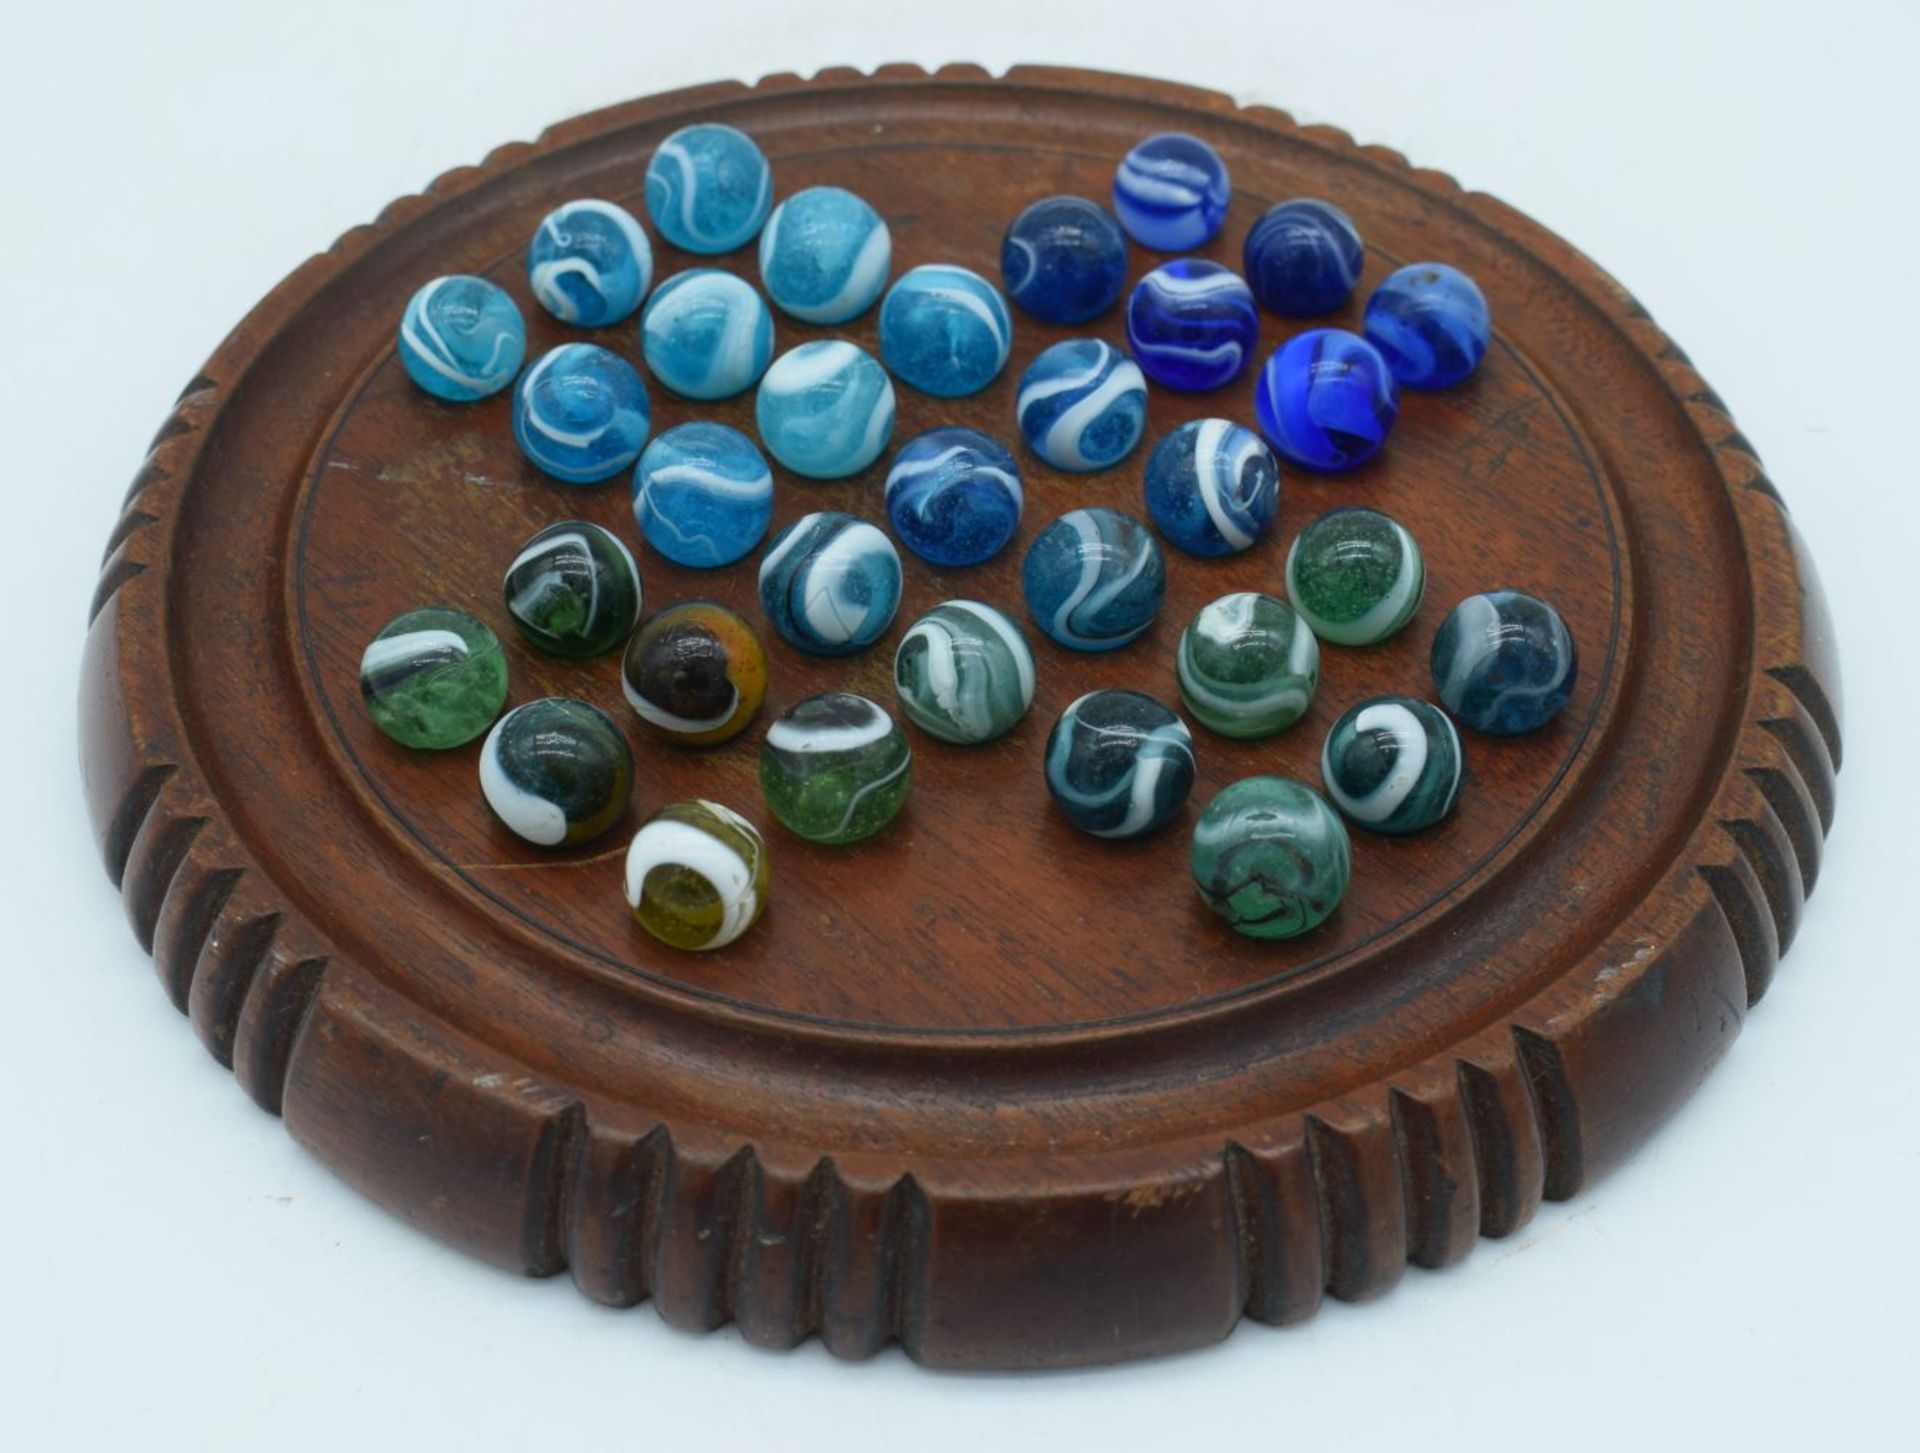 An antique Solitaire board with marbles 24 cm. - Image 4 of 4